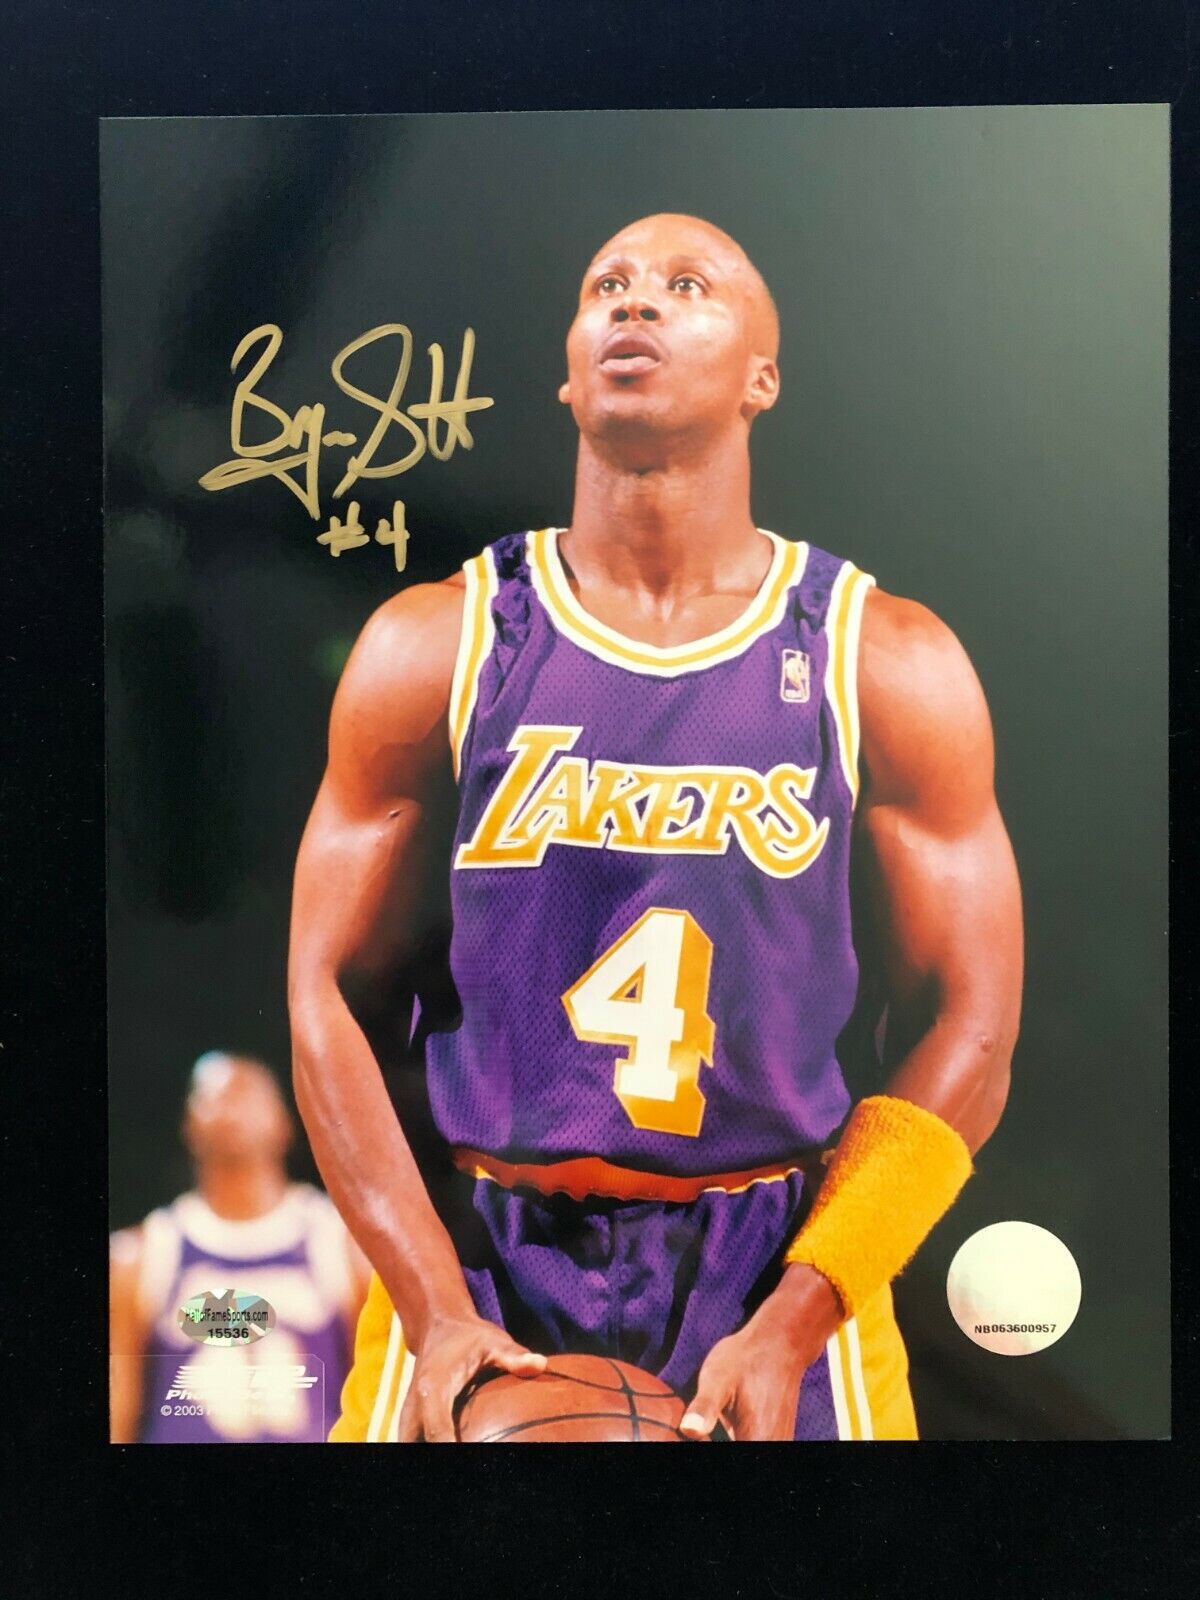 Byron Scott Signed #4 Los Angeles Lakers Game Photo Poster painting - 8x10 NBA Licensed Photo Poster painting